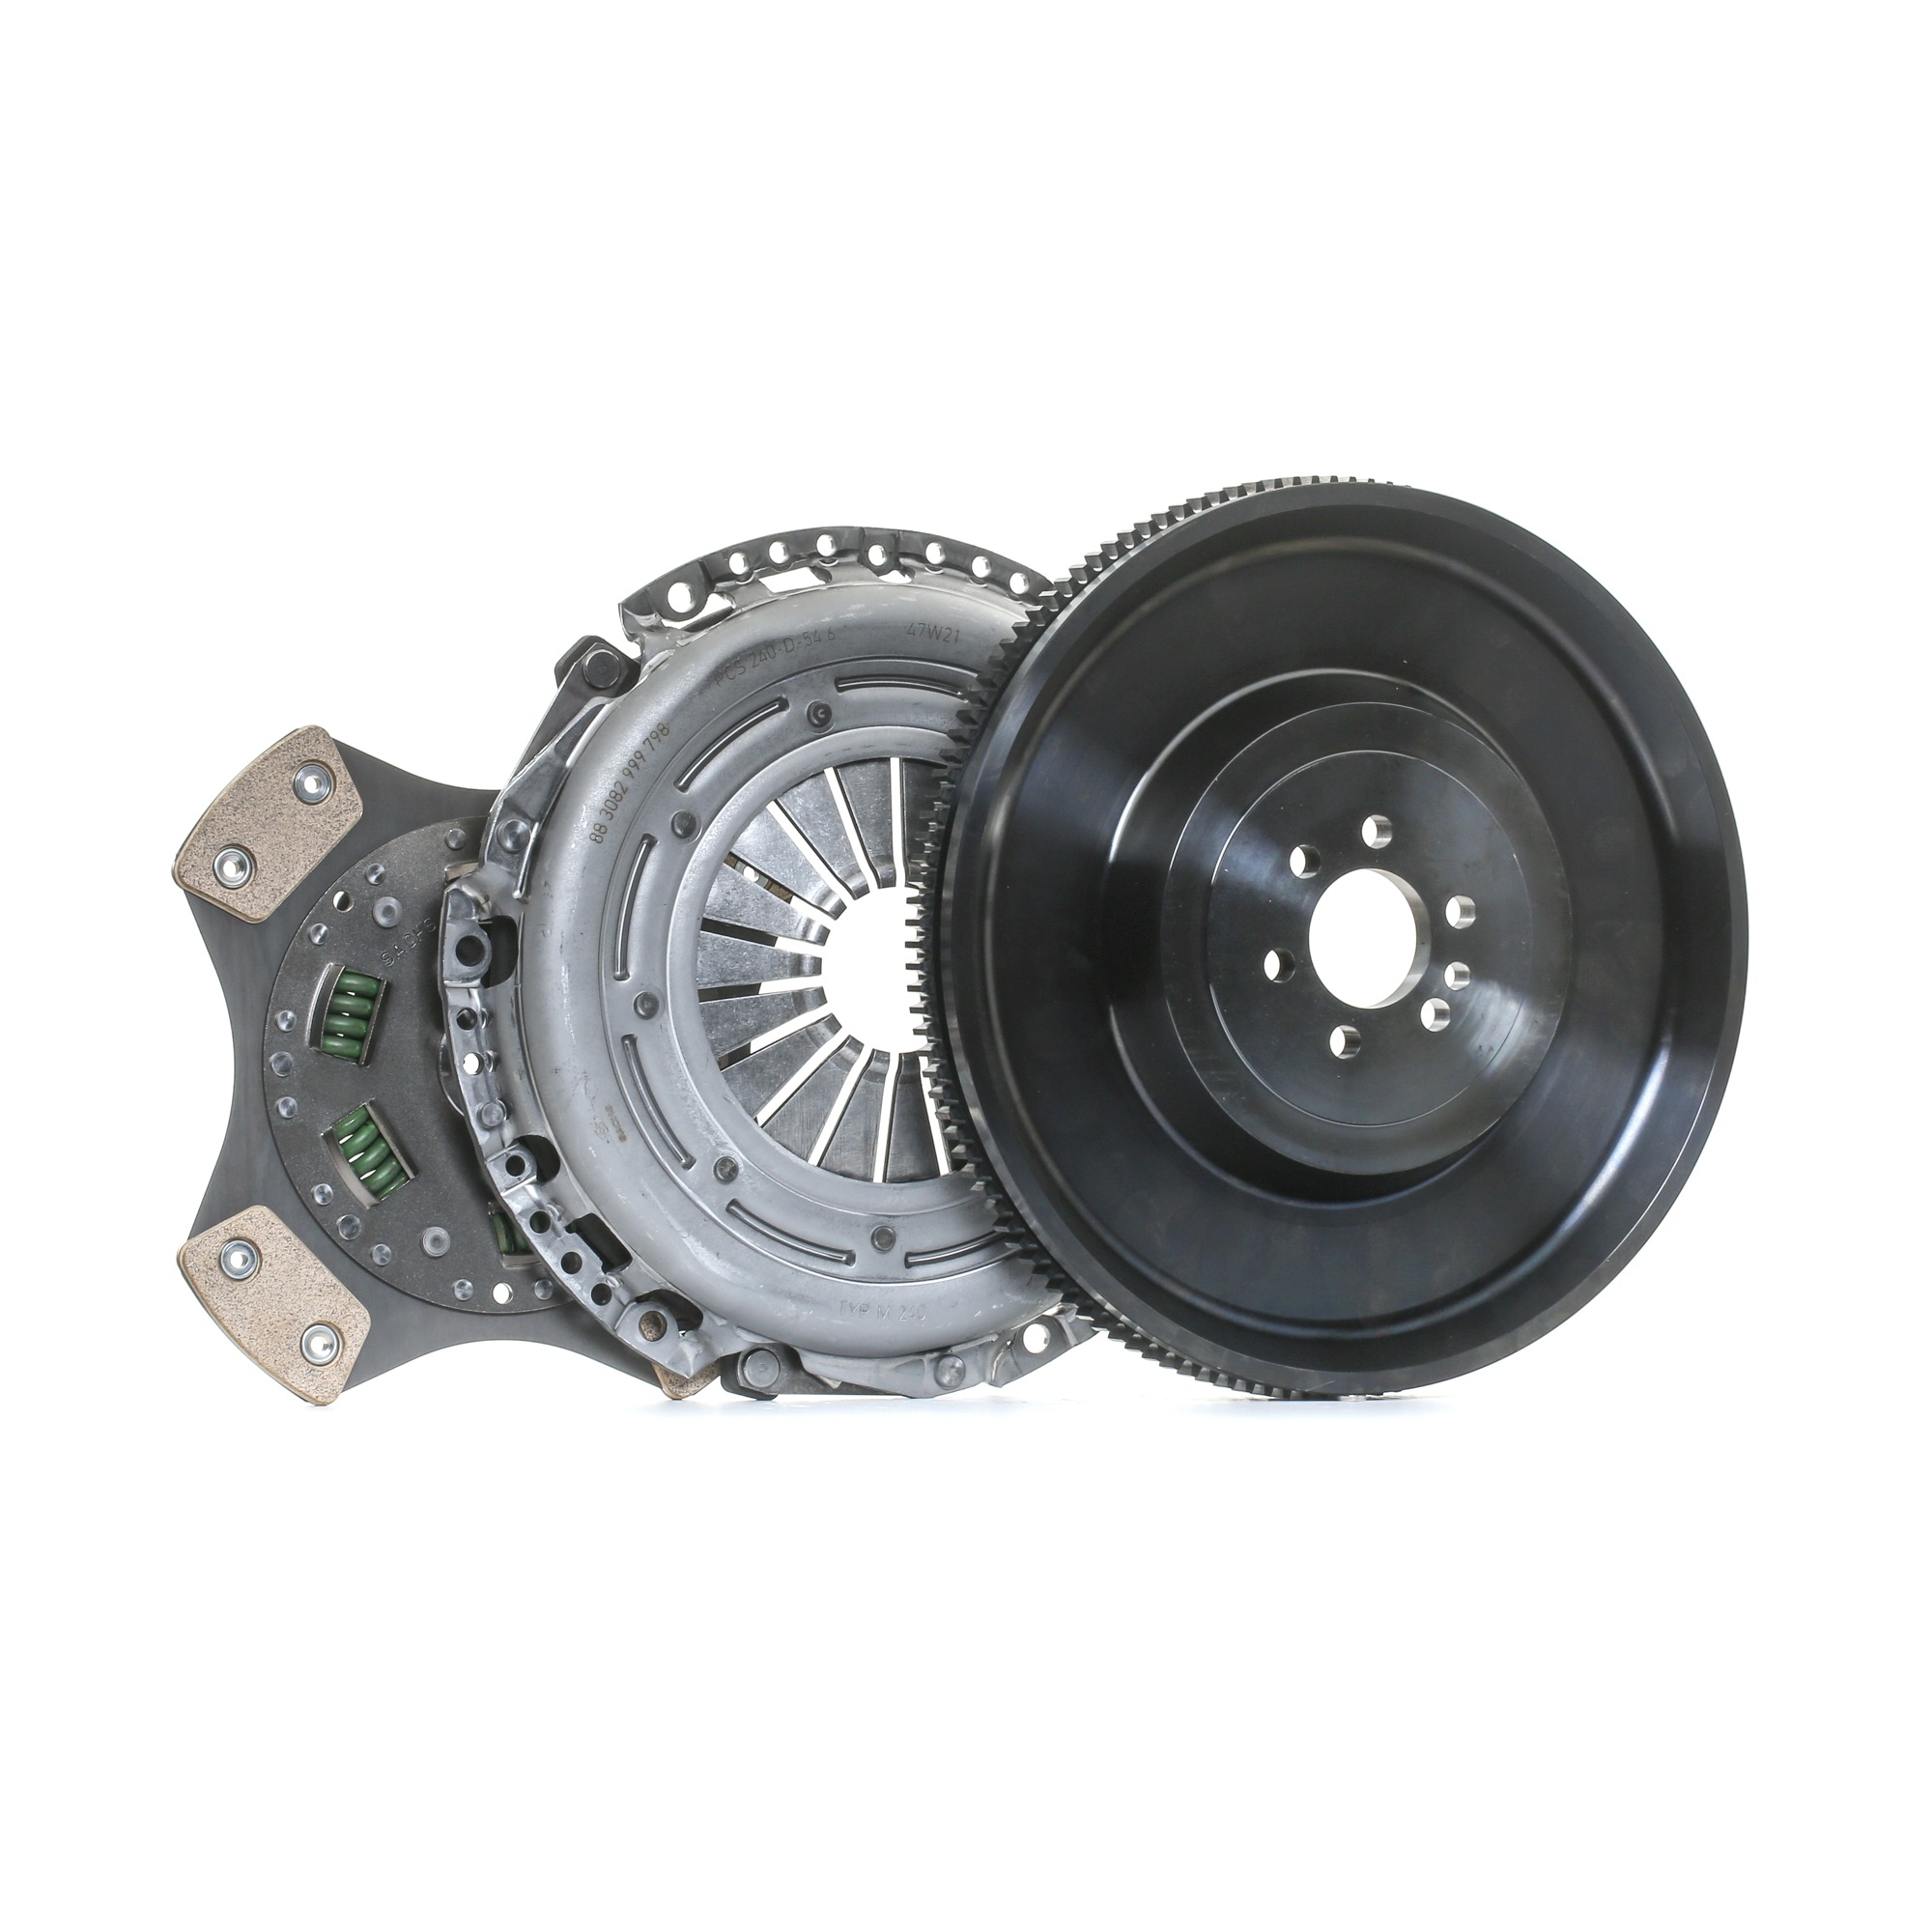 SACHS PERFORMANCE 883089 000053 Clutch kit SKODA experience and price